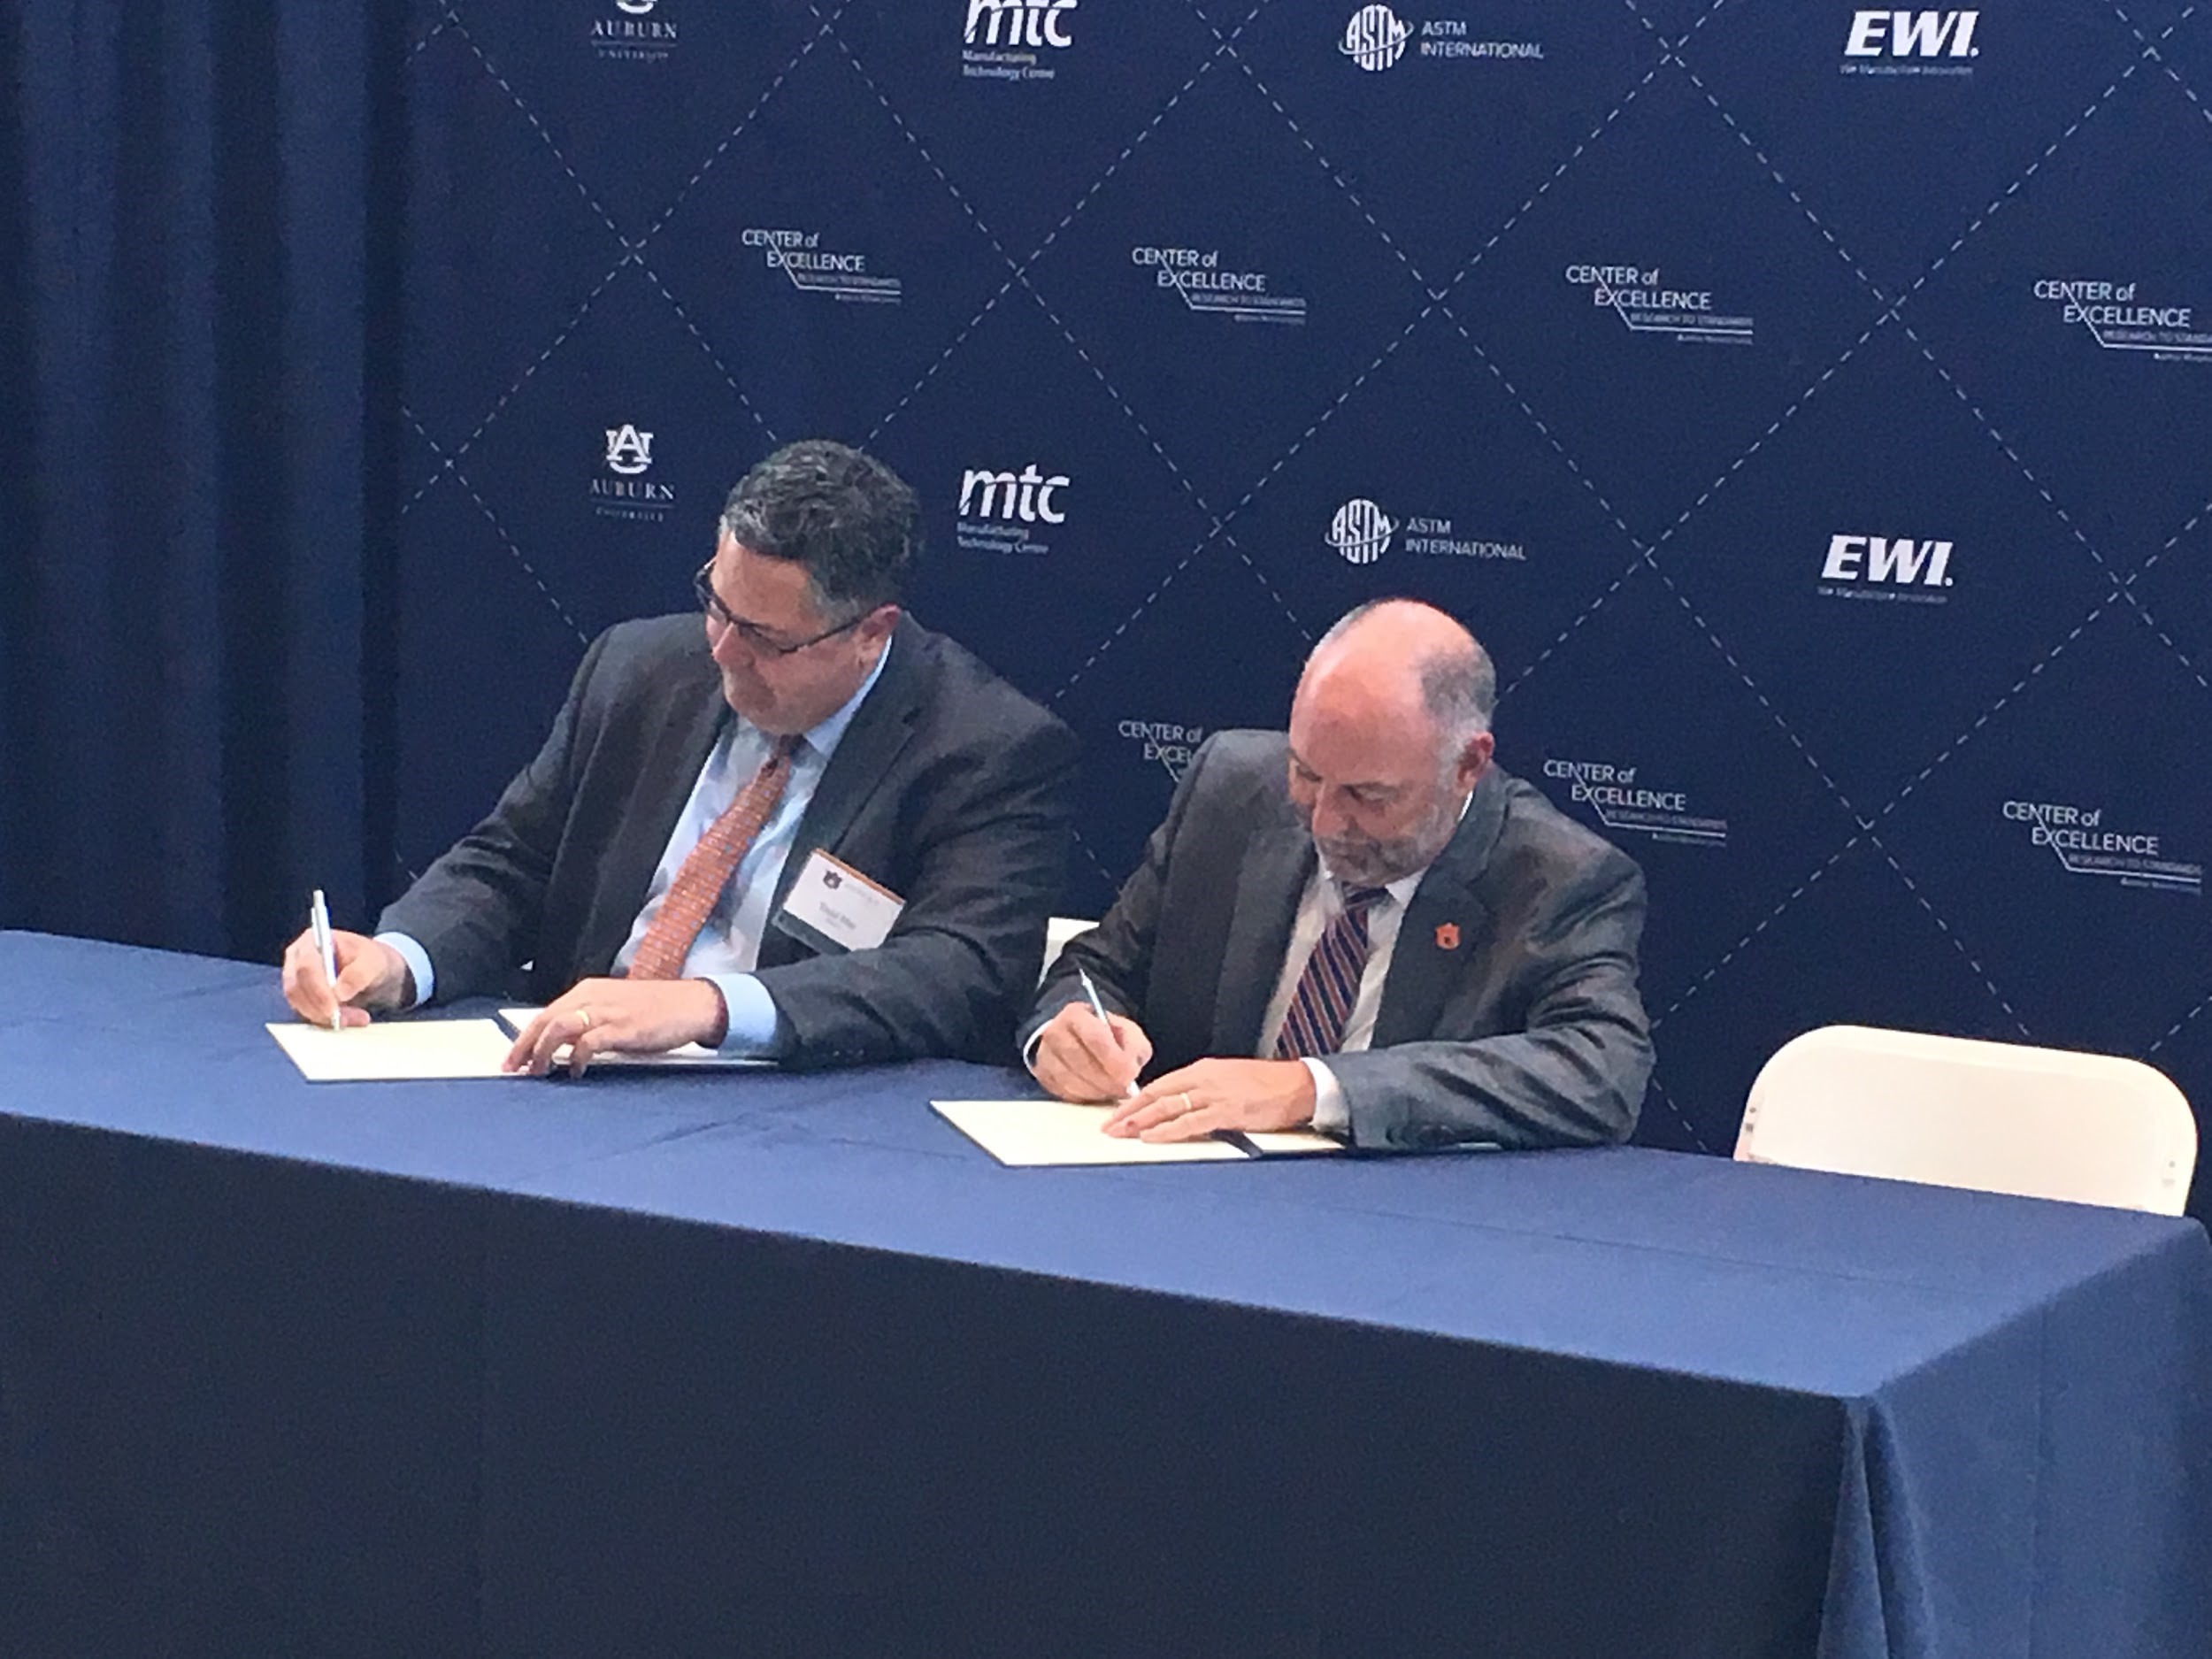 Pictured: Todd May, Director of NASA Marshall Space Flight Center and Dr. Steven Leah, President of Auburn University, sign the agreement for the National Center for Additive Manufacturing on July 23rd.